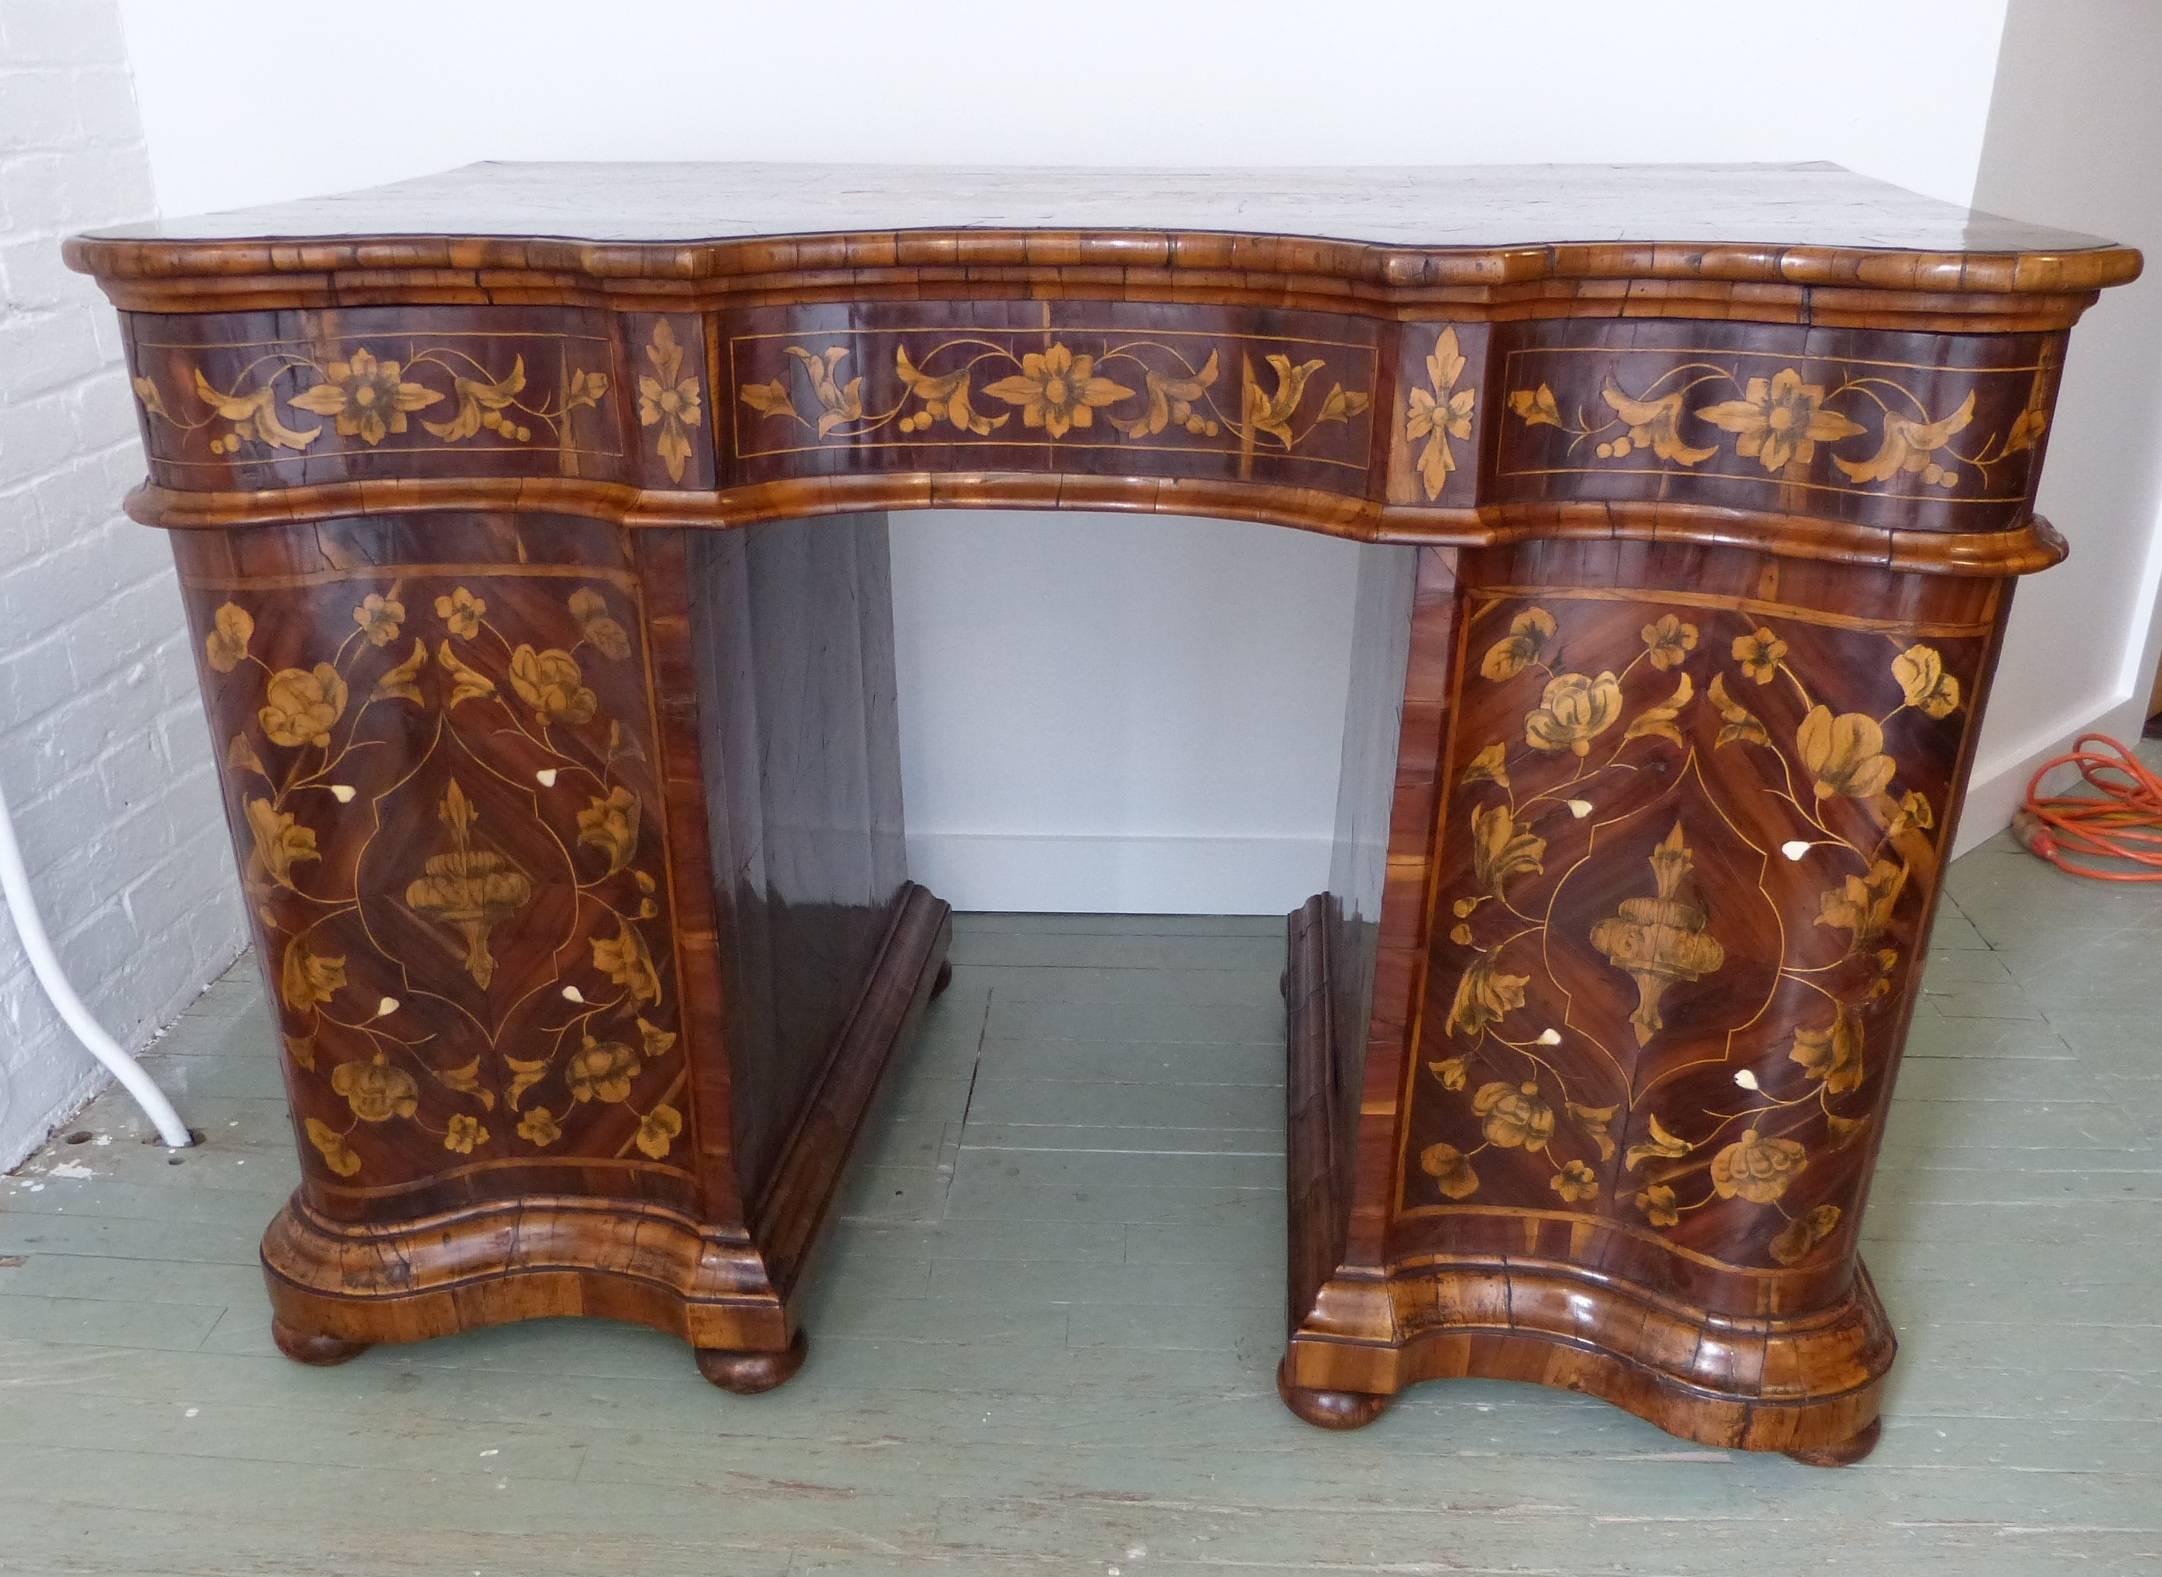 An exceptional 18th century inlaid desk, the front with a writing slide above two drawers and two cupboard doors, the back with exaggerated serpentine pedestals. Inlaid overall with shaped vines ending in simulated floral decoration, the top inlaid